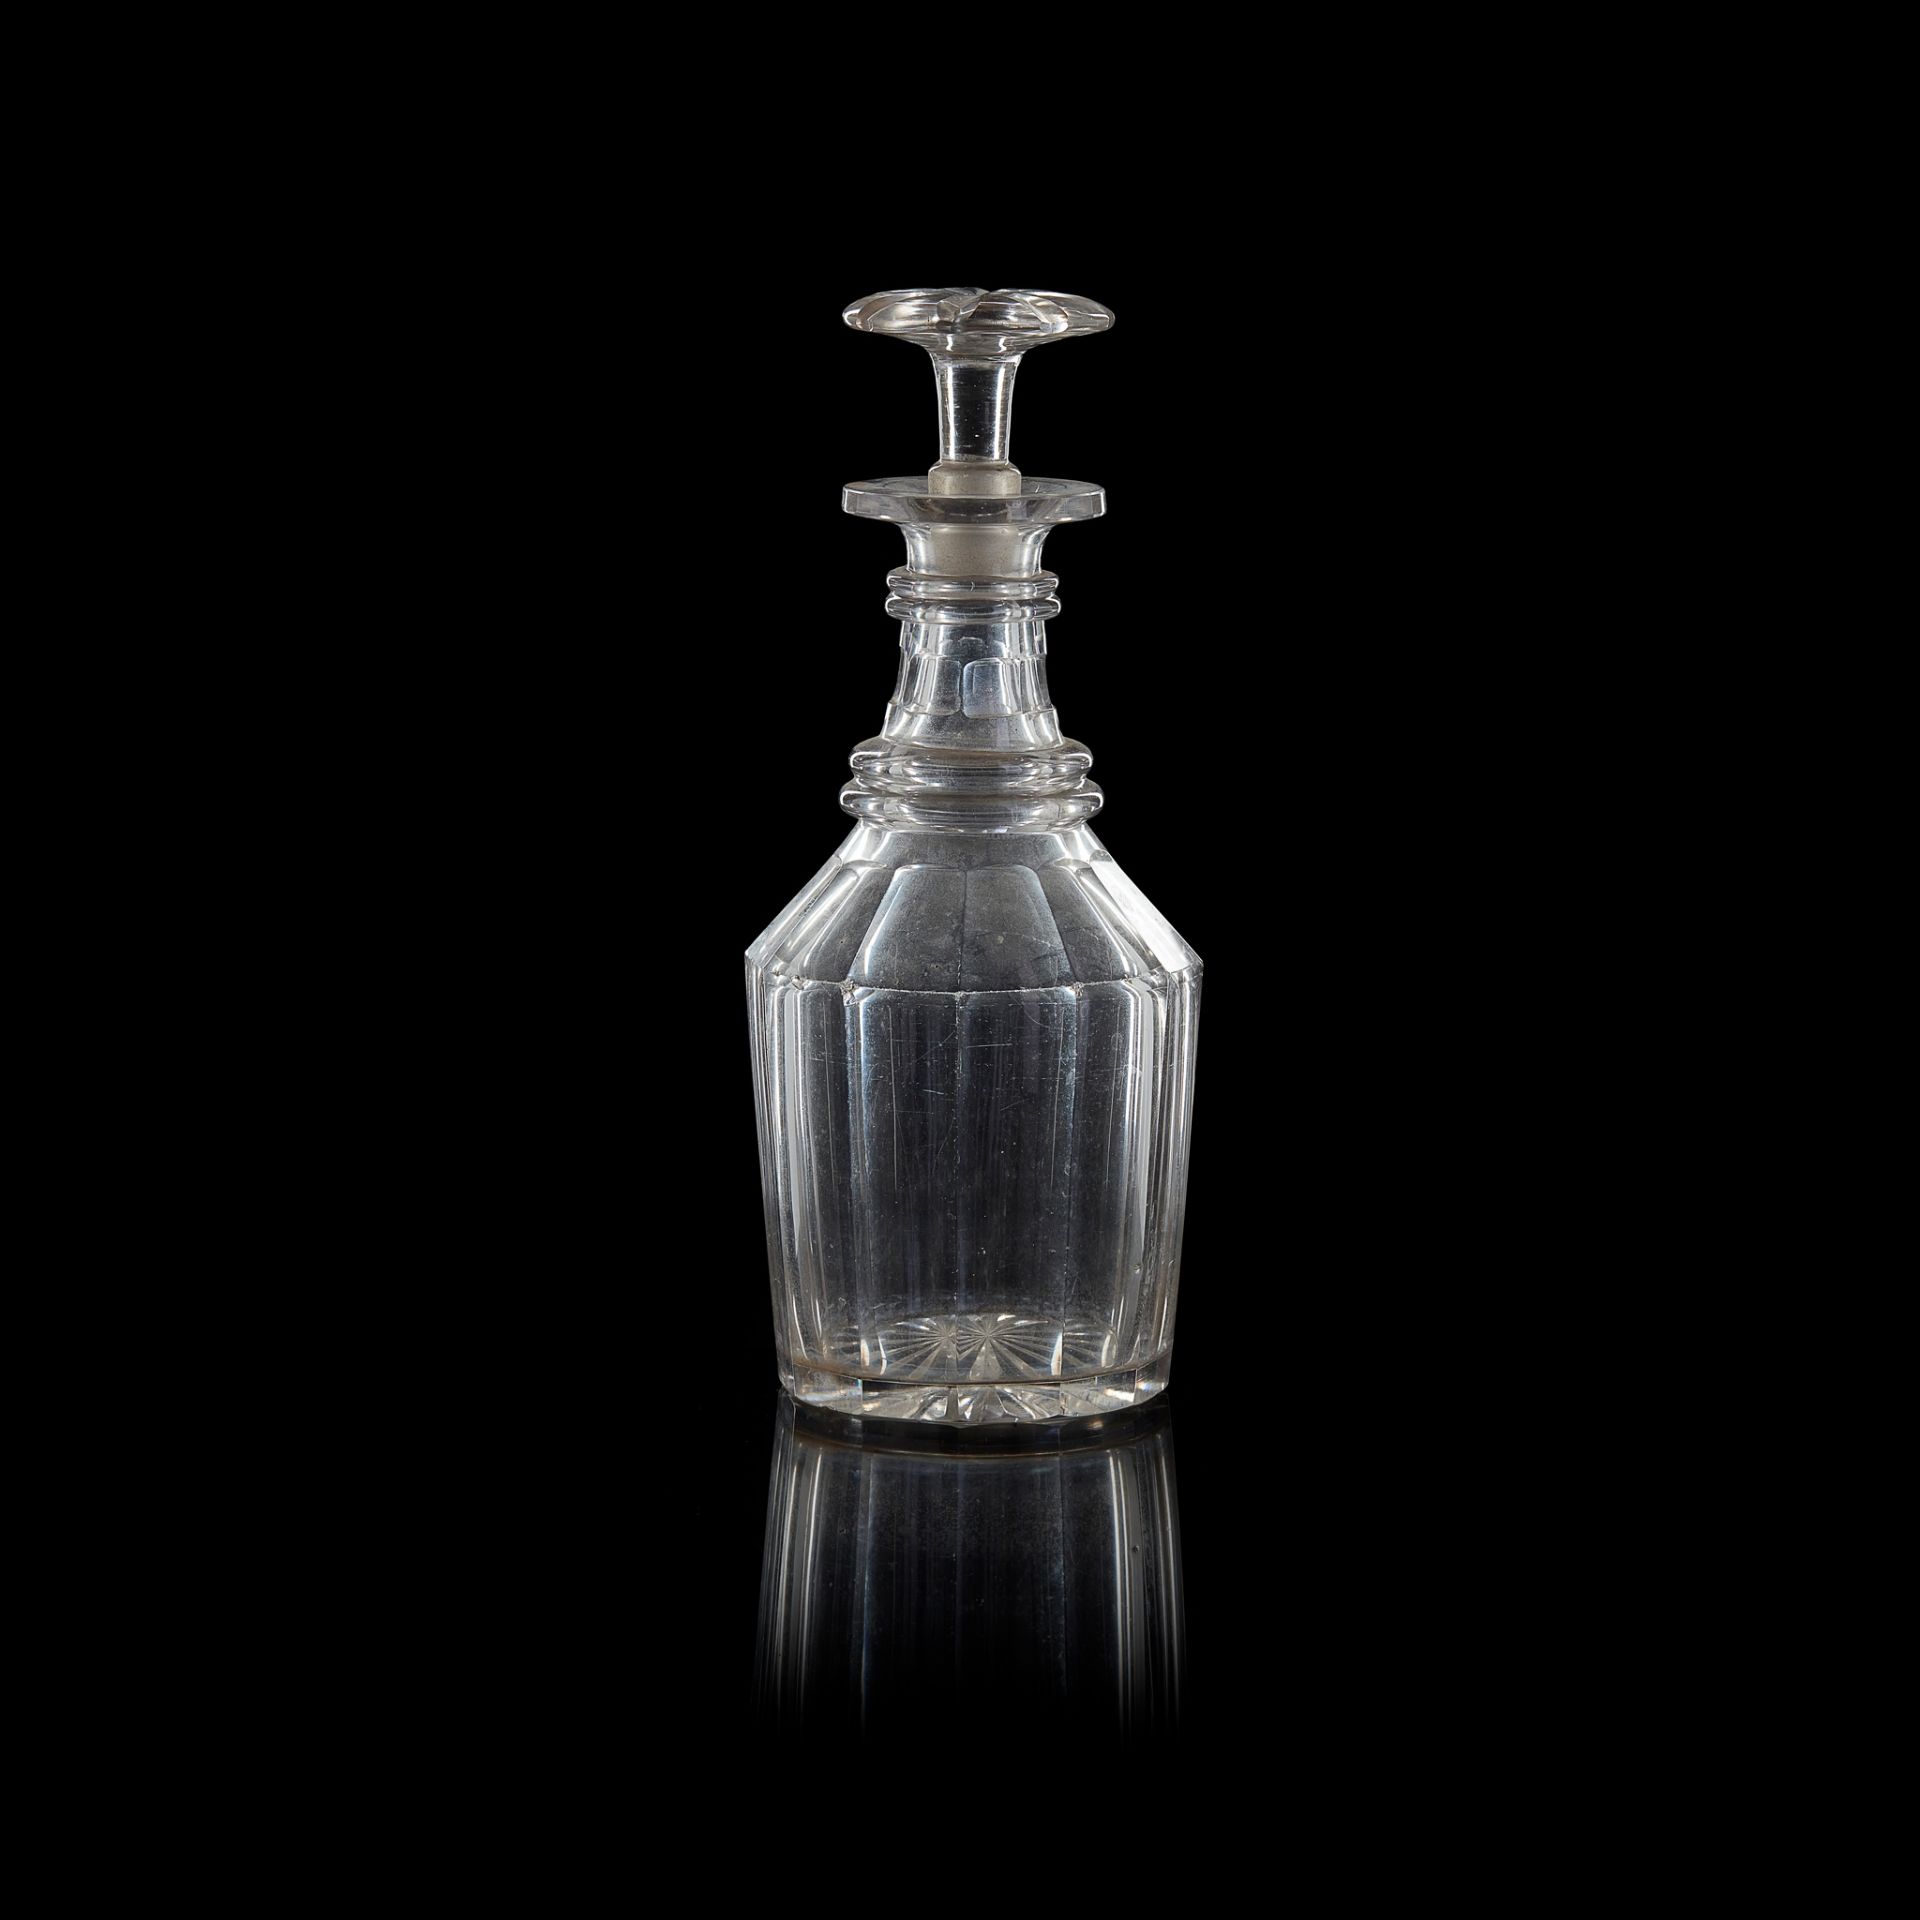 TWO PAIRS OF GLASS DECANTERS EARLY 19TH CENTURY - Image 2 of 4